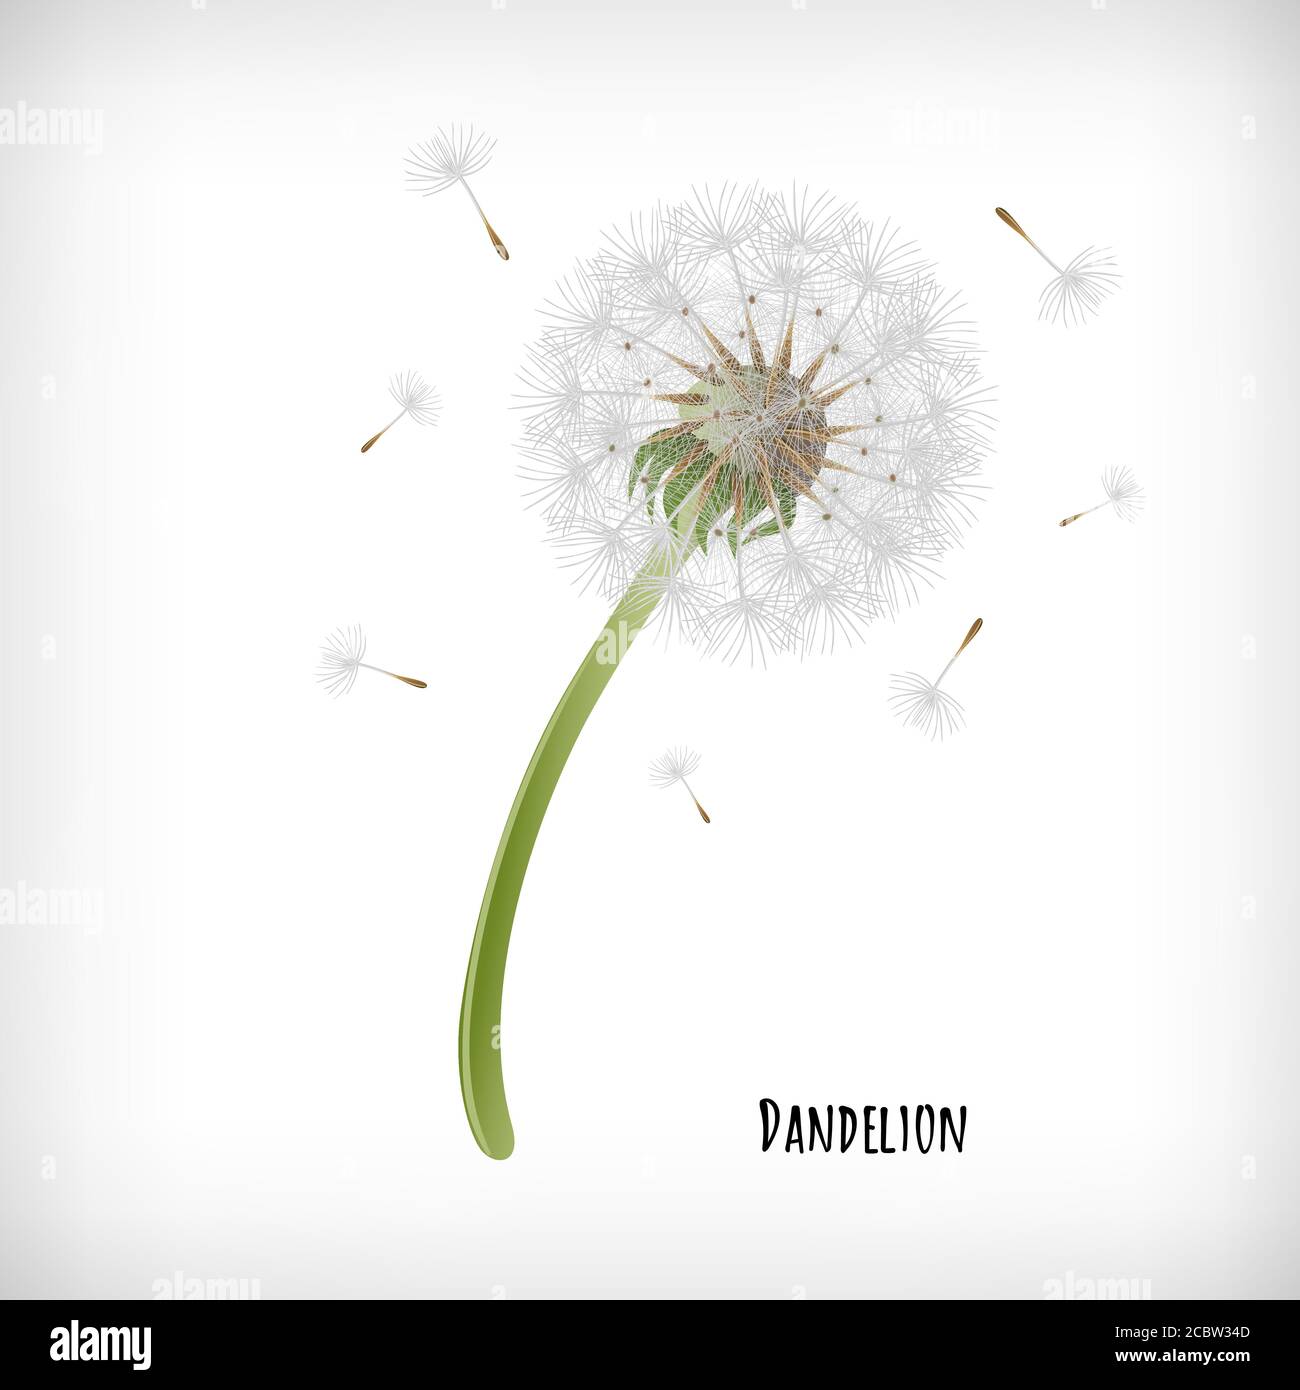 Dandelion plant with flying seeds in the wind isolated on white background. Lettering Dandelion. Hand drawn herb icon. Element for print, cards, web designs. Vector illustration. Stock Vector